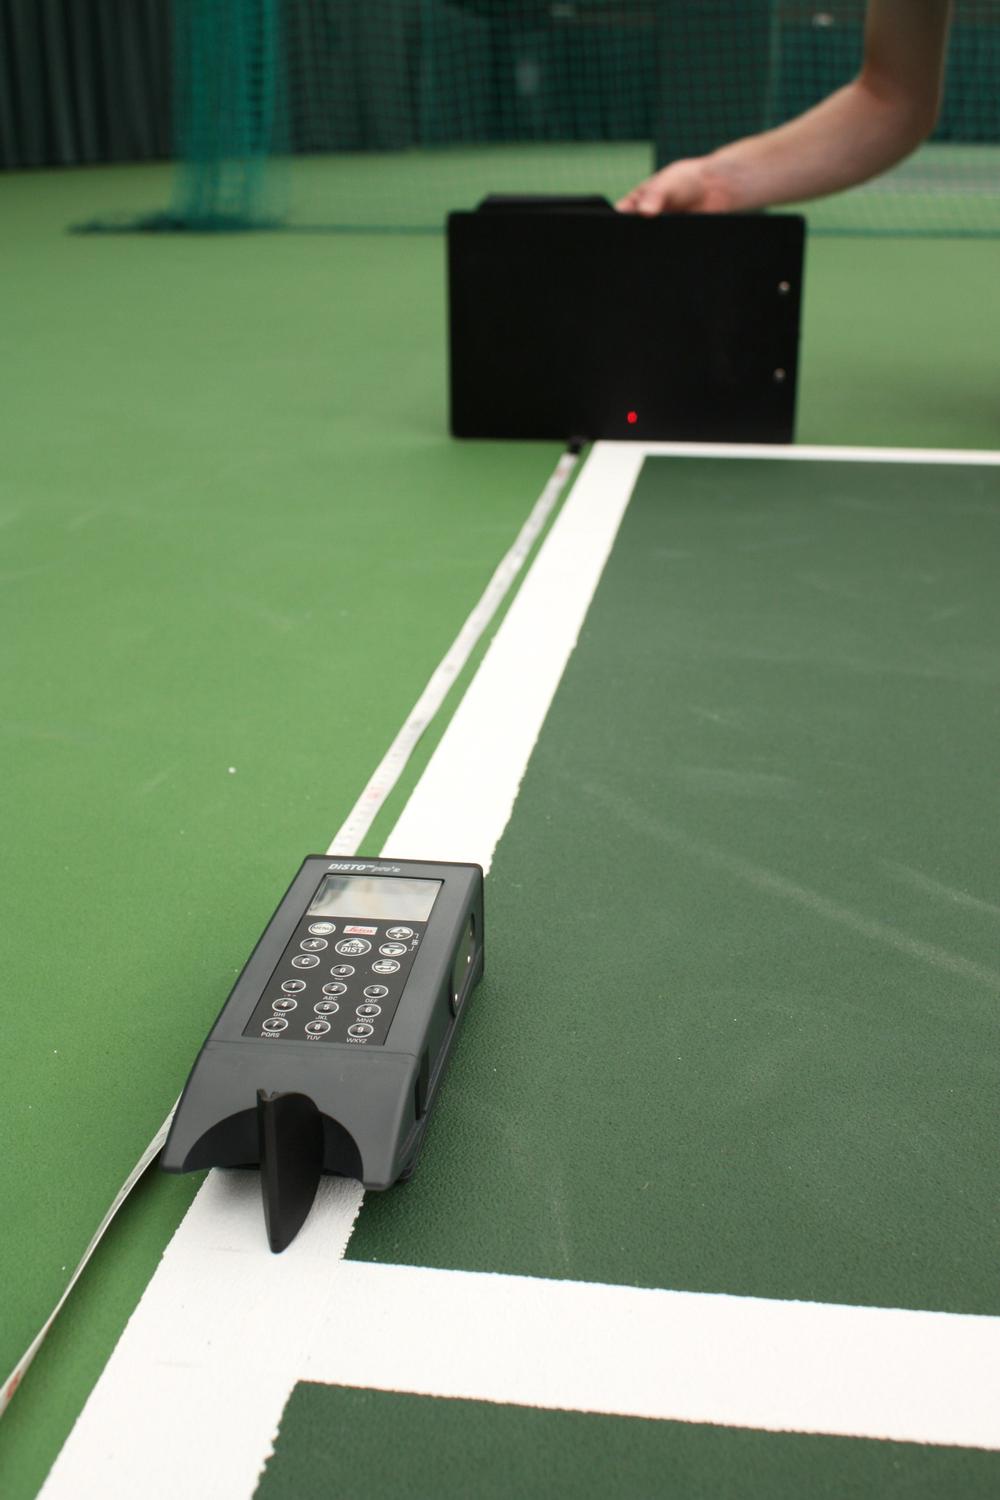 An evenness test measures the size of bumps or dips in the tennis court surface, using a straight line edge